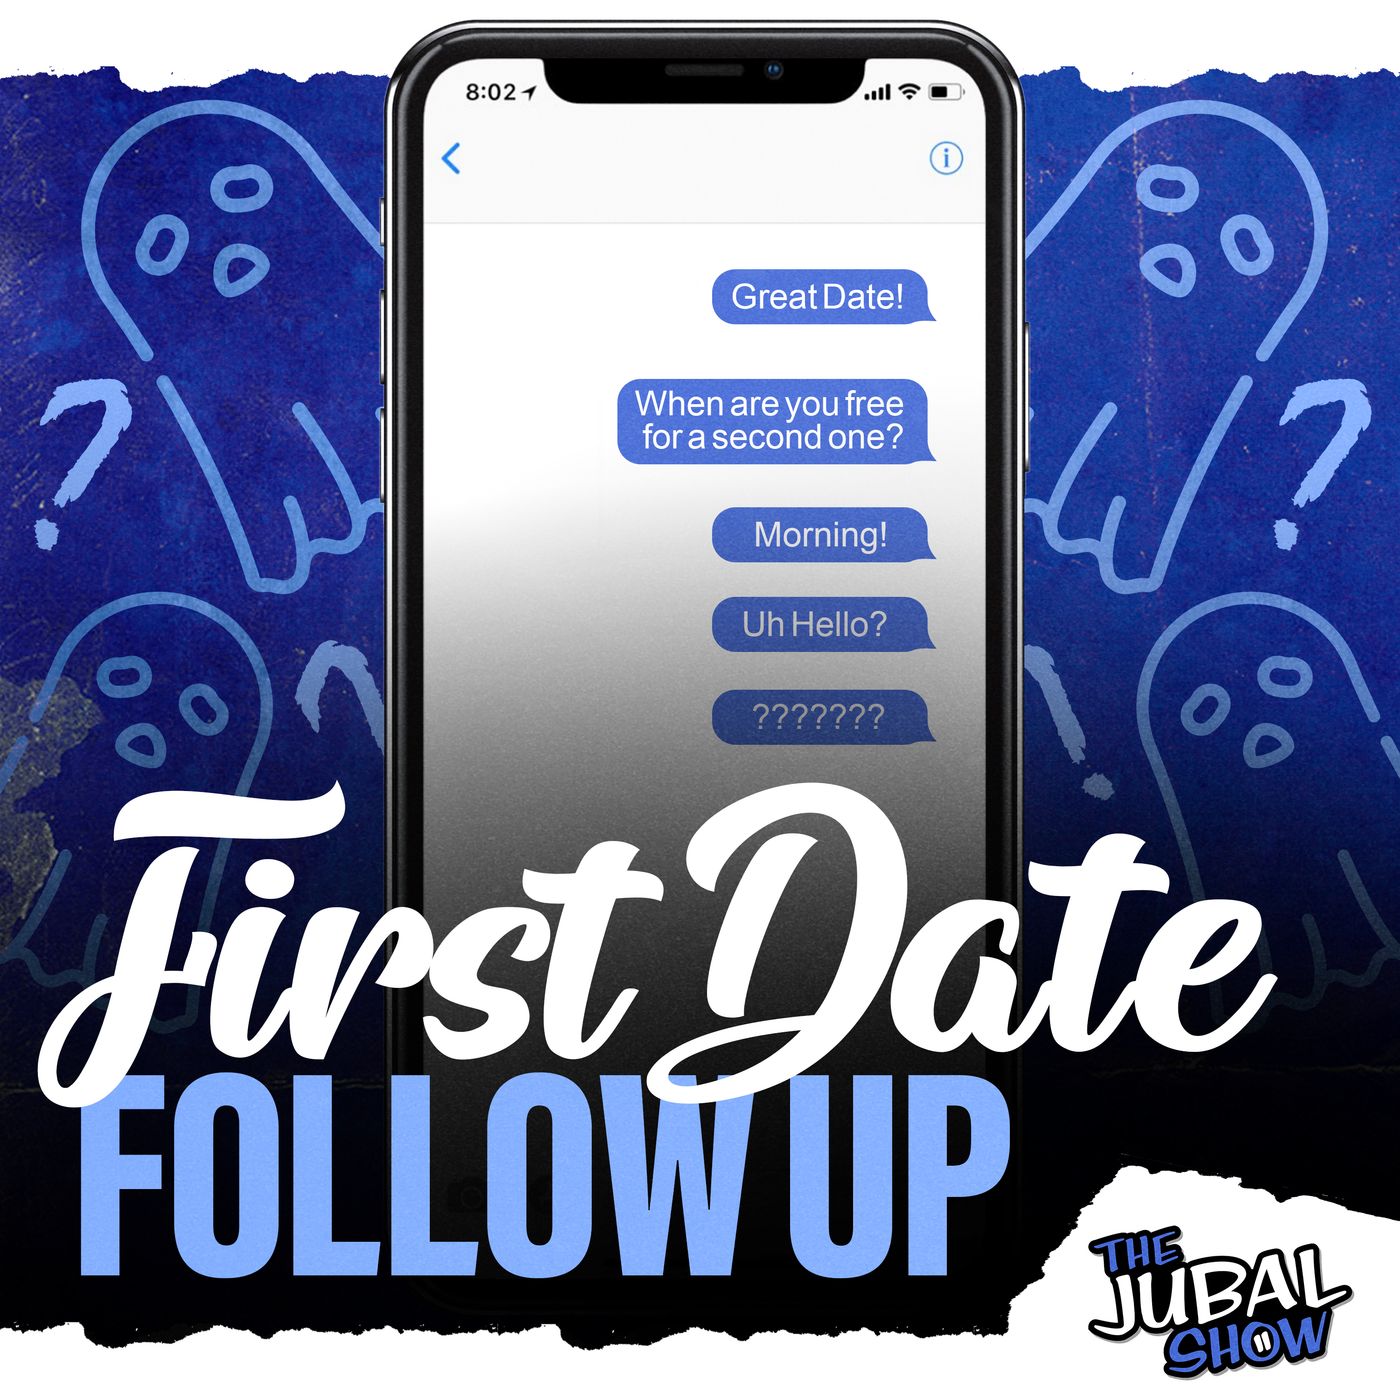 First Date Follow Up – The Jubal Show